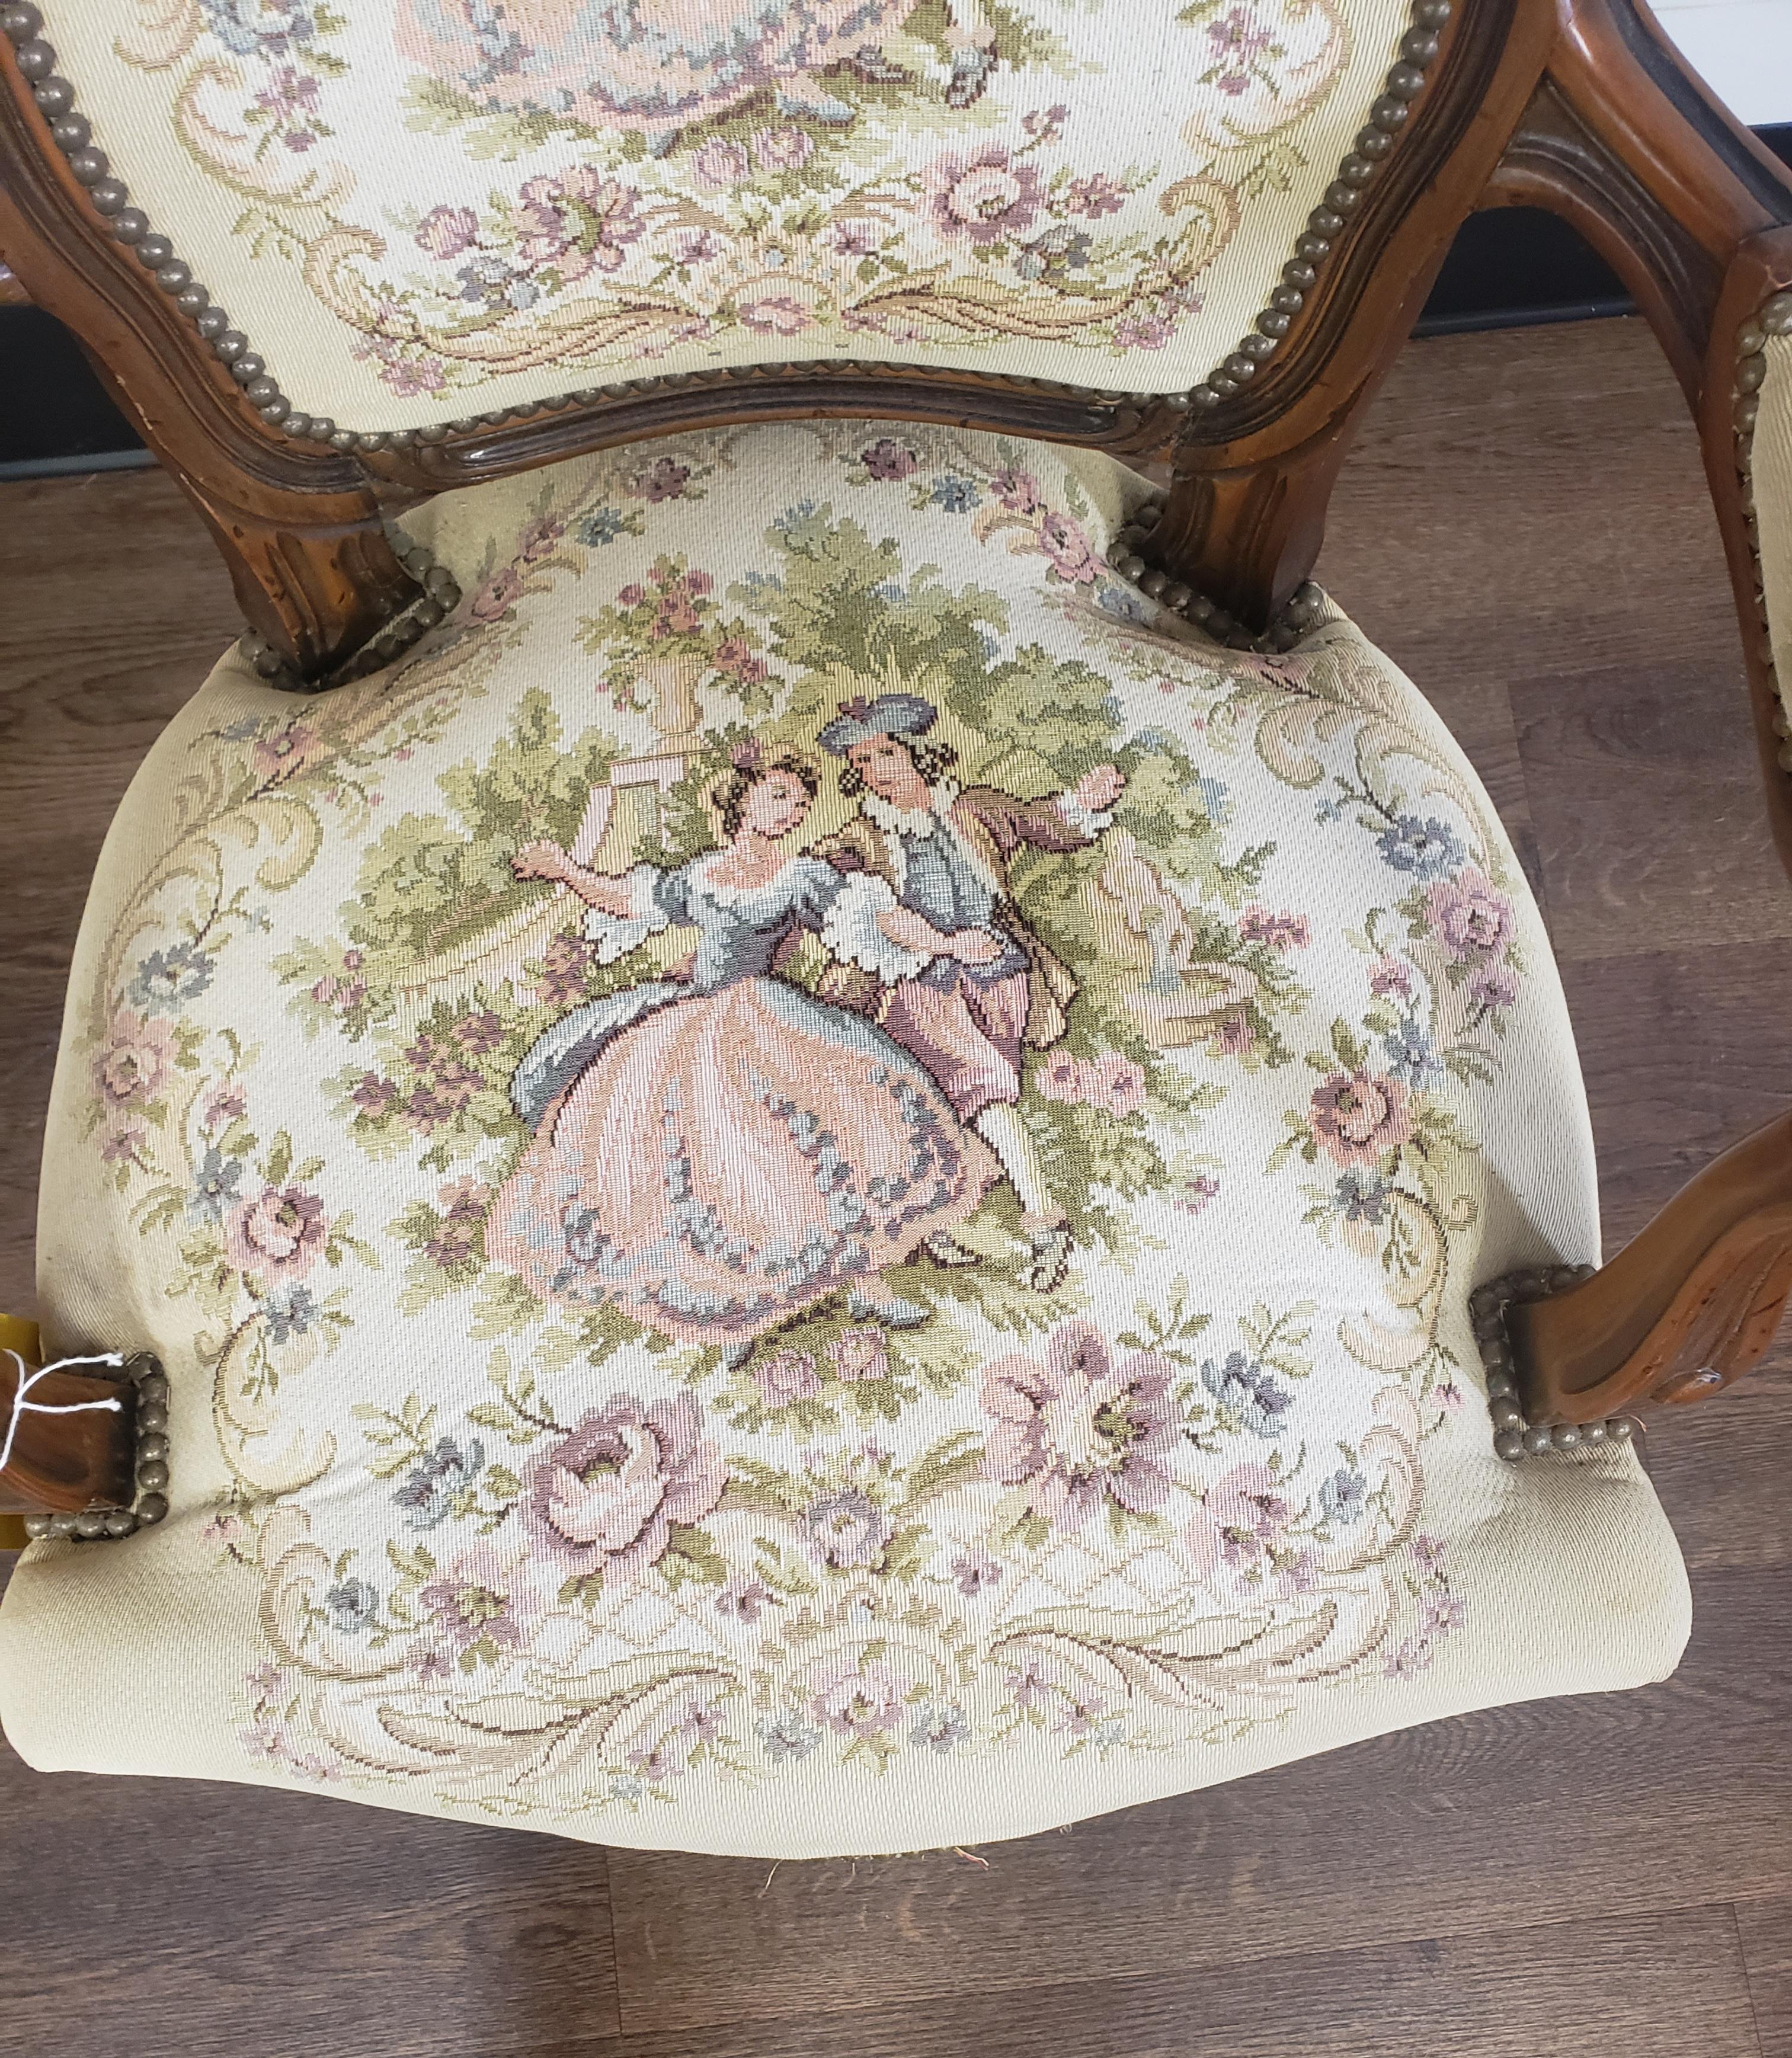 An Italian made Chateau d'Ax Spa French Louis XV style Tapestry armchair in good vintage condition with firm seat and beautiful carvings. Listing includes solid wood frame, beautiful wood grain, distressed finish, cabriole legs, quality Italian